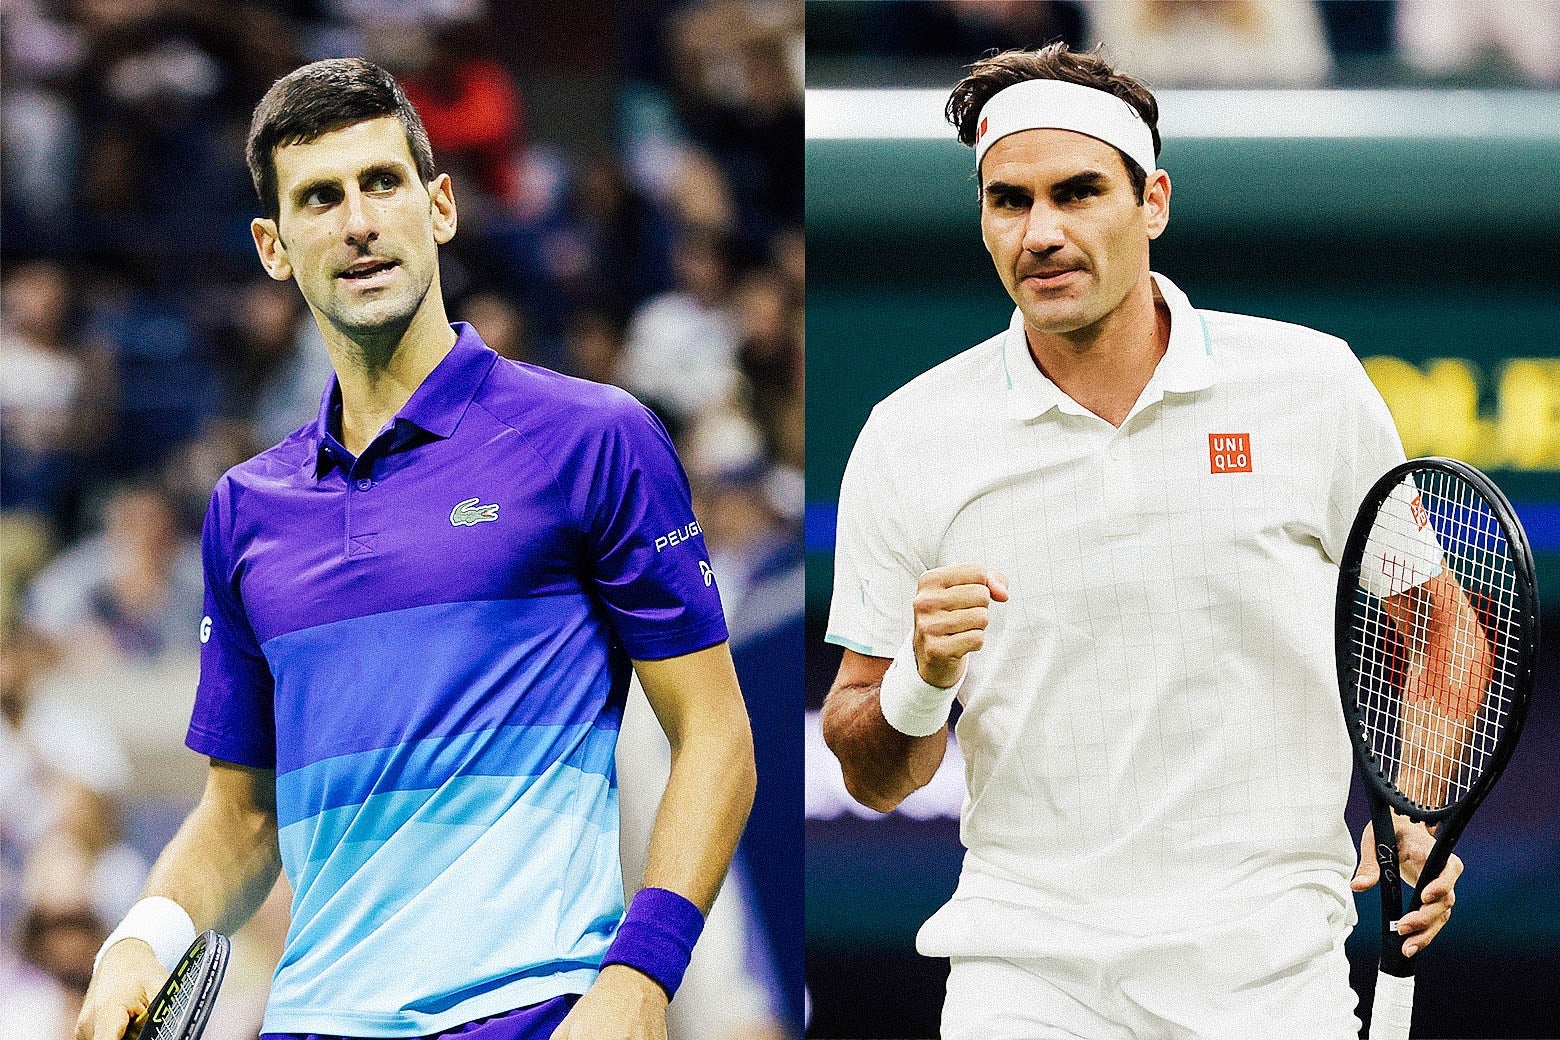 Side by side photos of Djokovic on the court looking to his left and Federer on the court holding his racket and fist-pumping